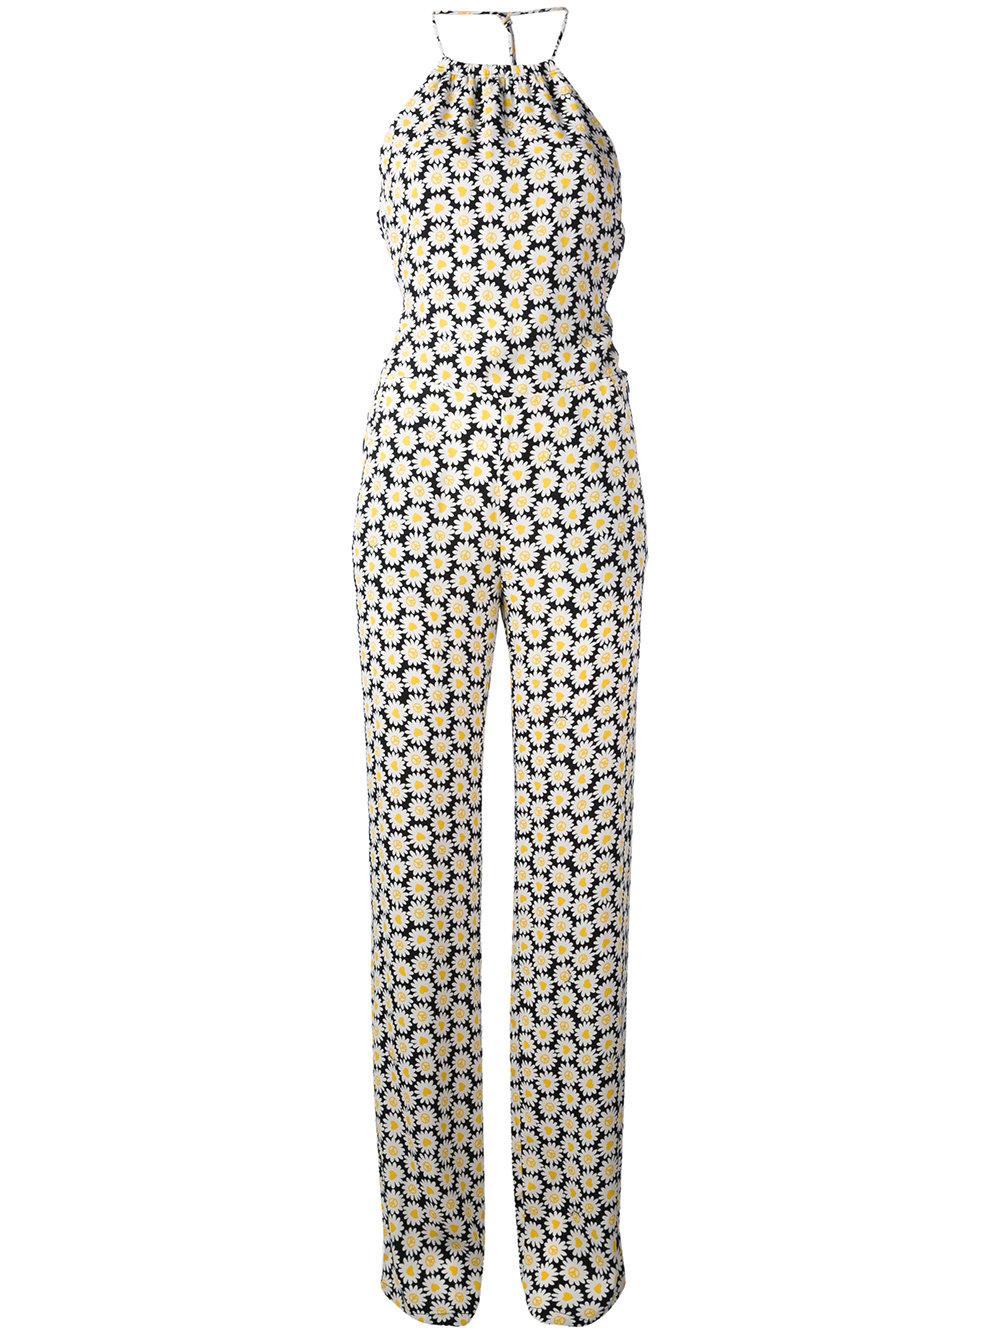 Love Moschino Daisy Print Jumpsuit in White - Lyst